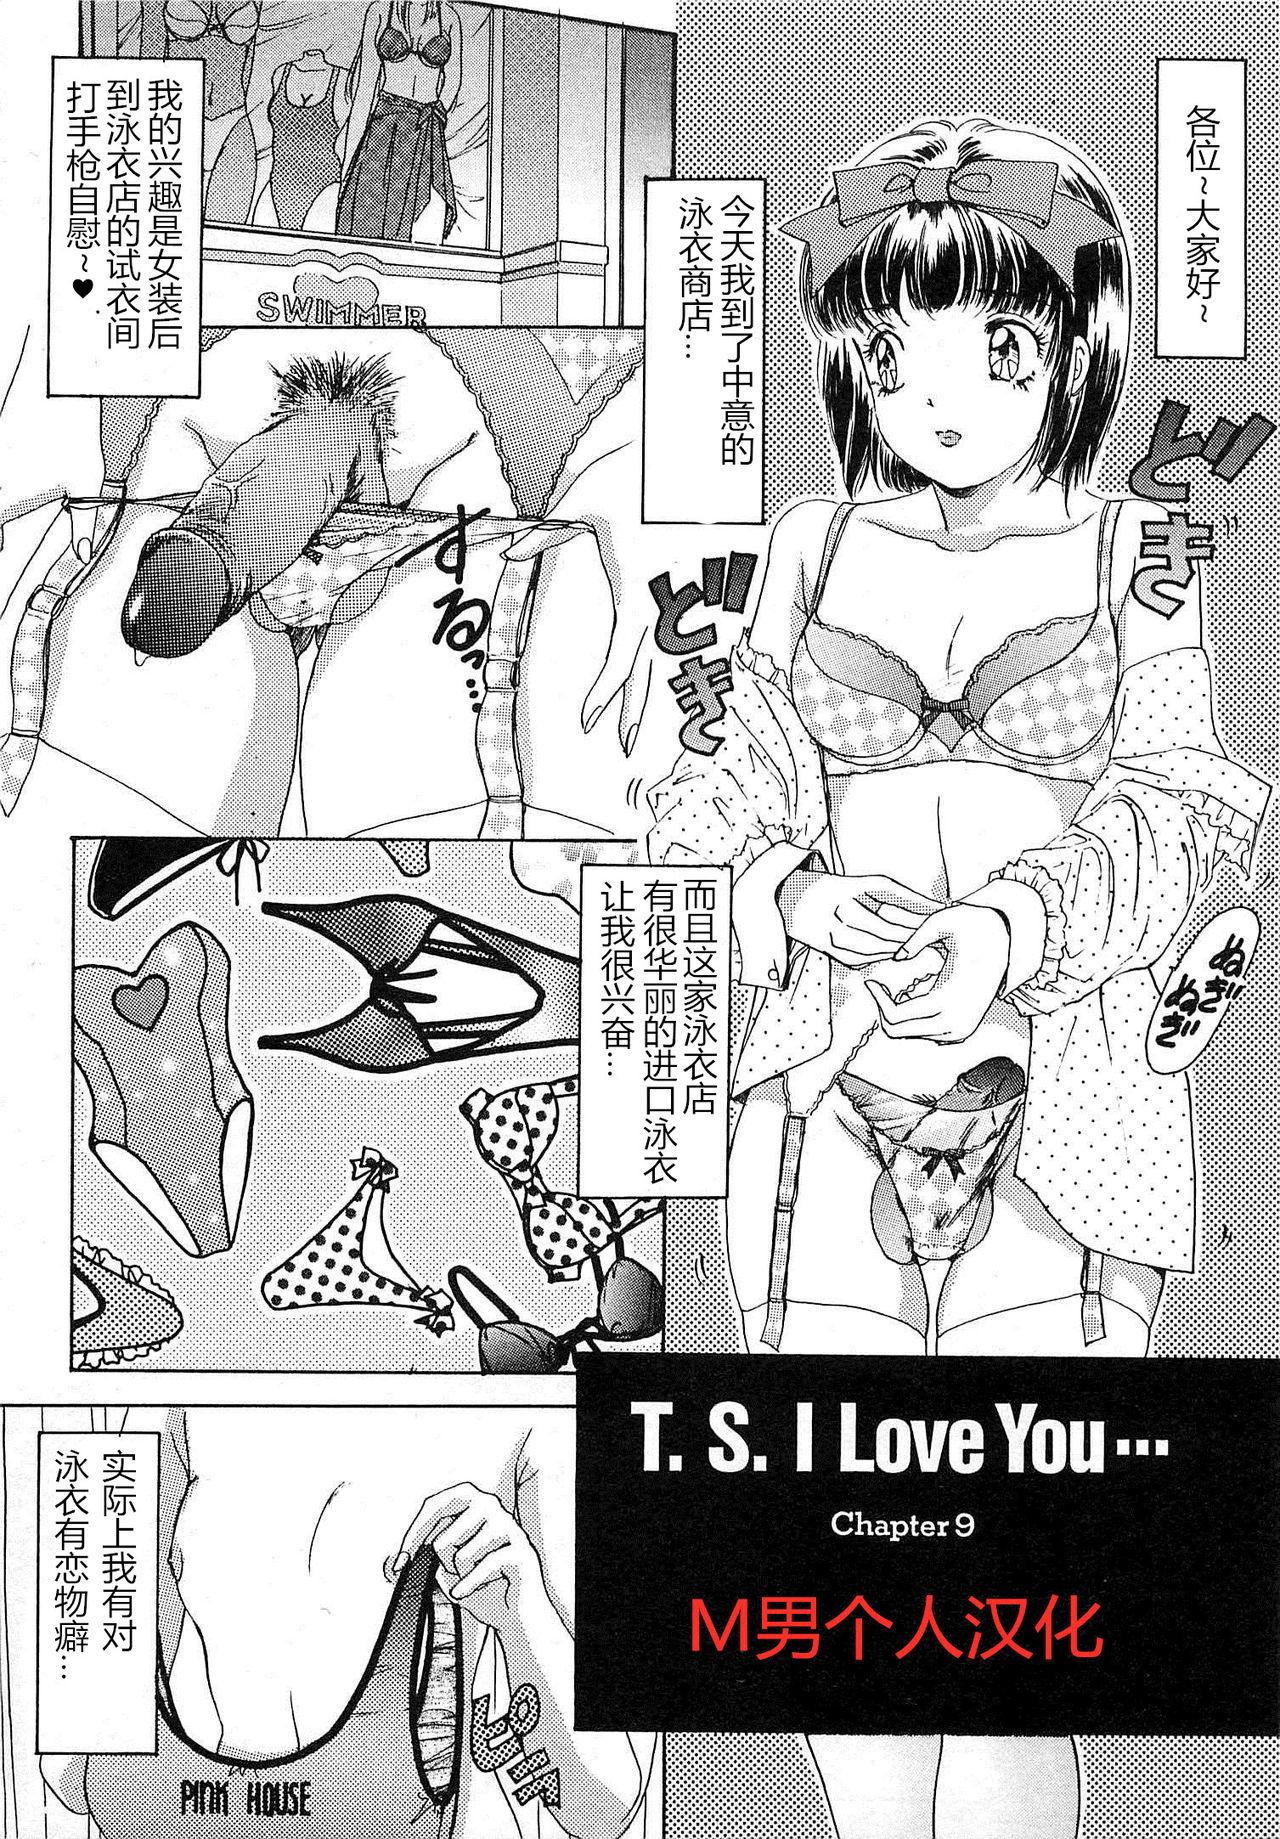 T.S. I LOVE YOU chapter 09 0